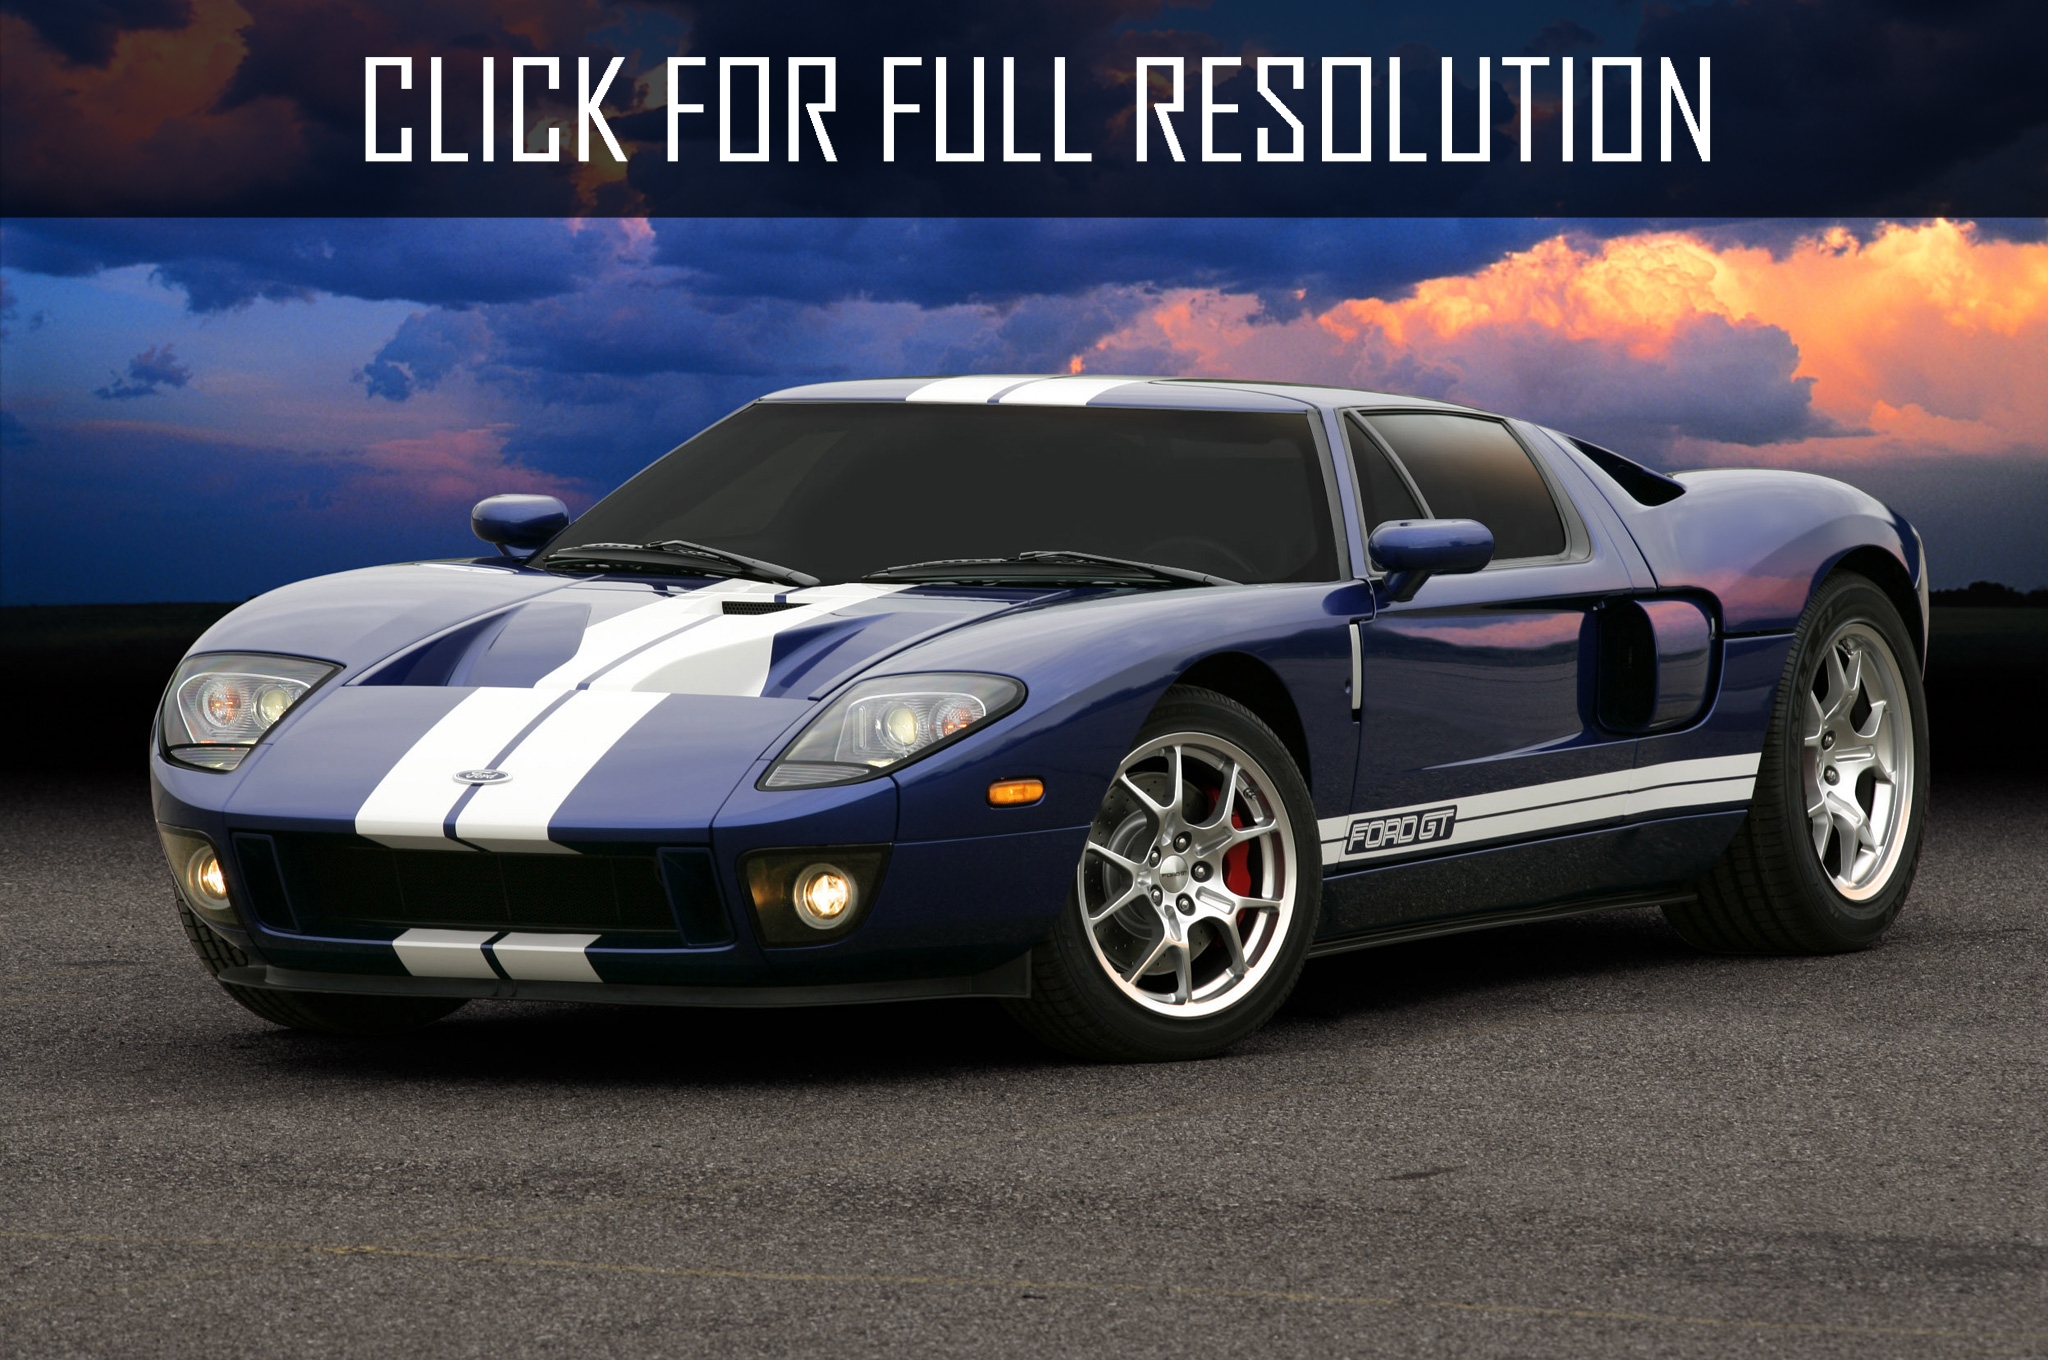 Ford GT 2014